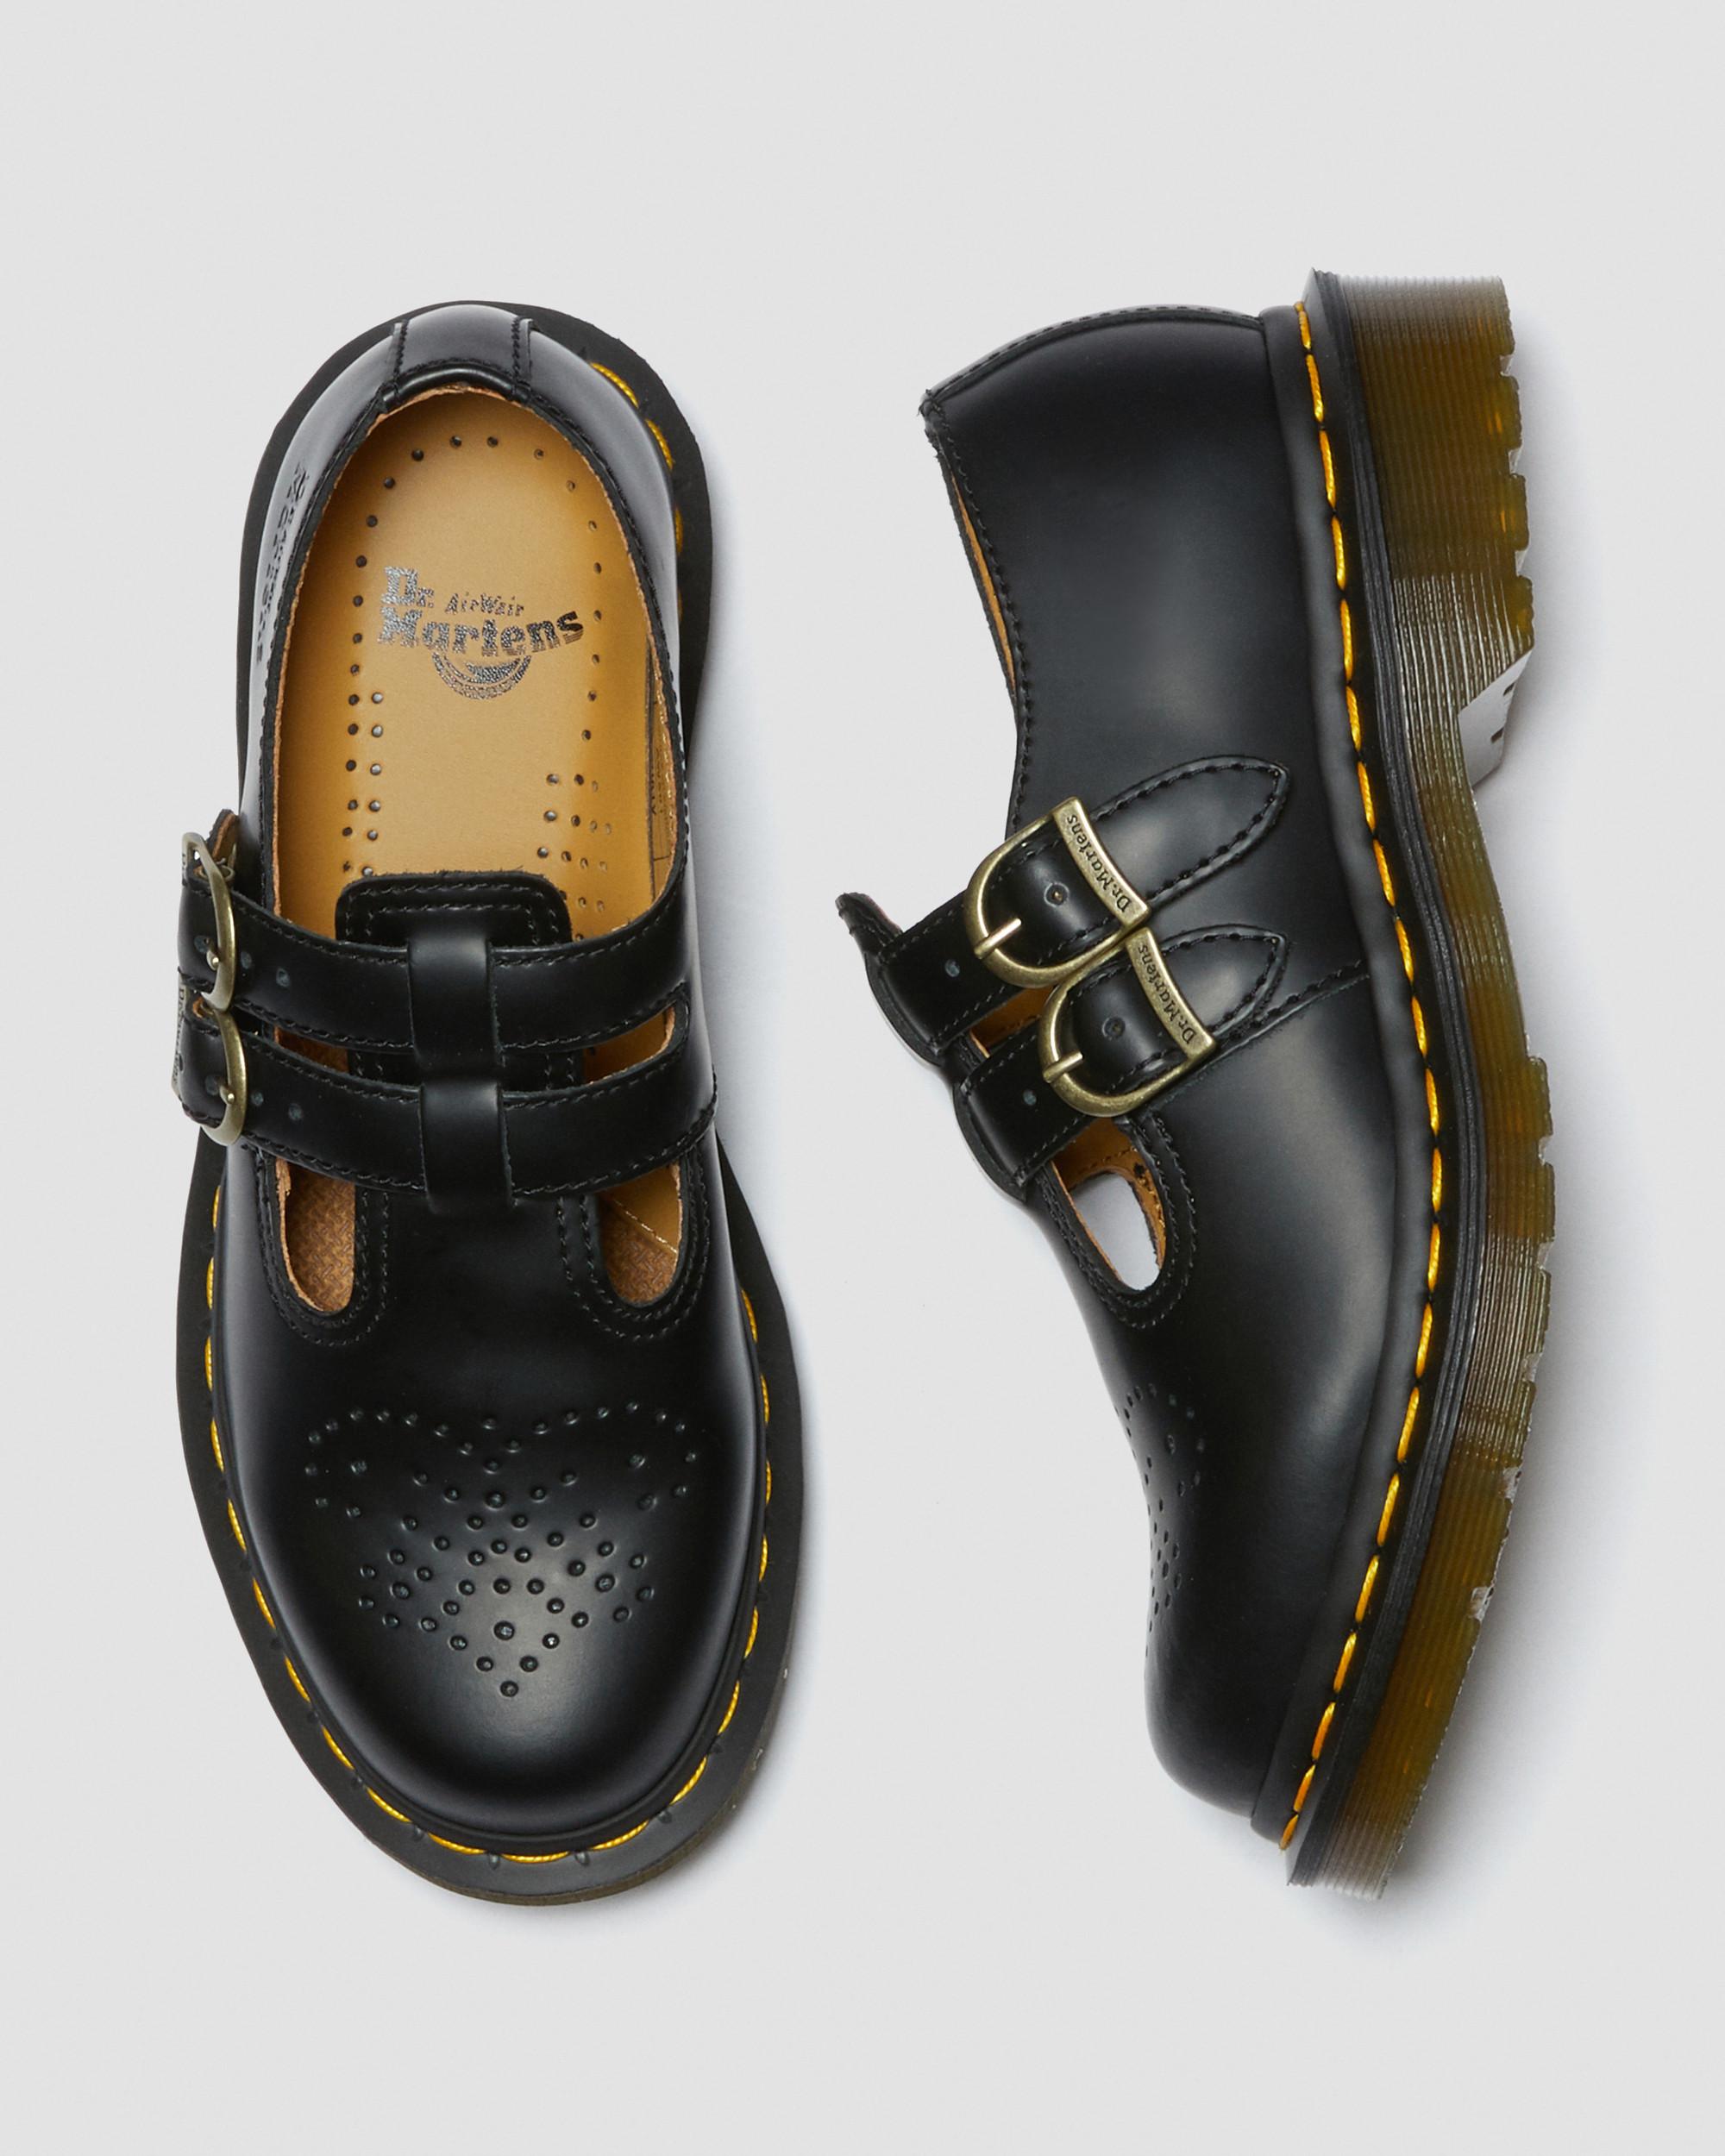 DR MARTENS 8065 Smooth Leather Mary Jane Shoes